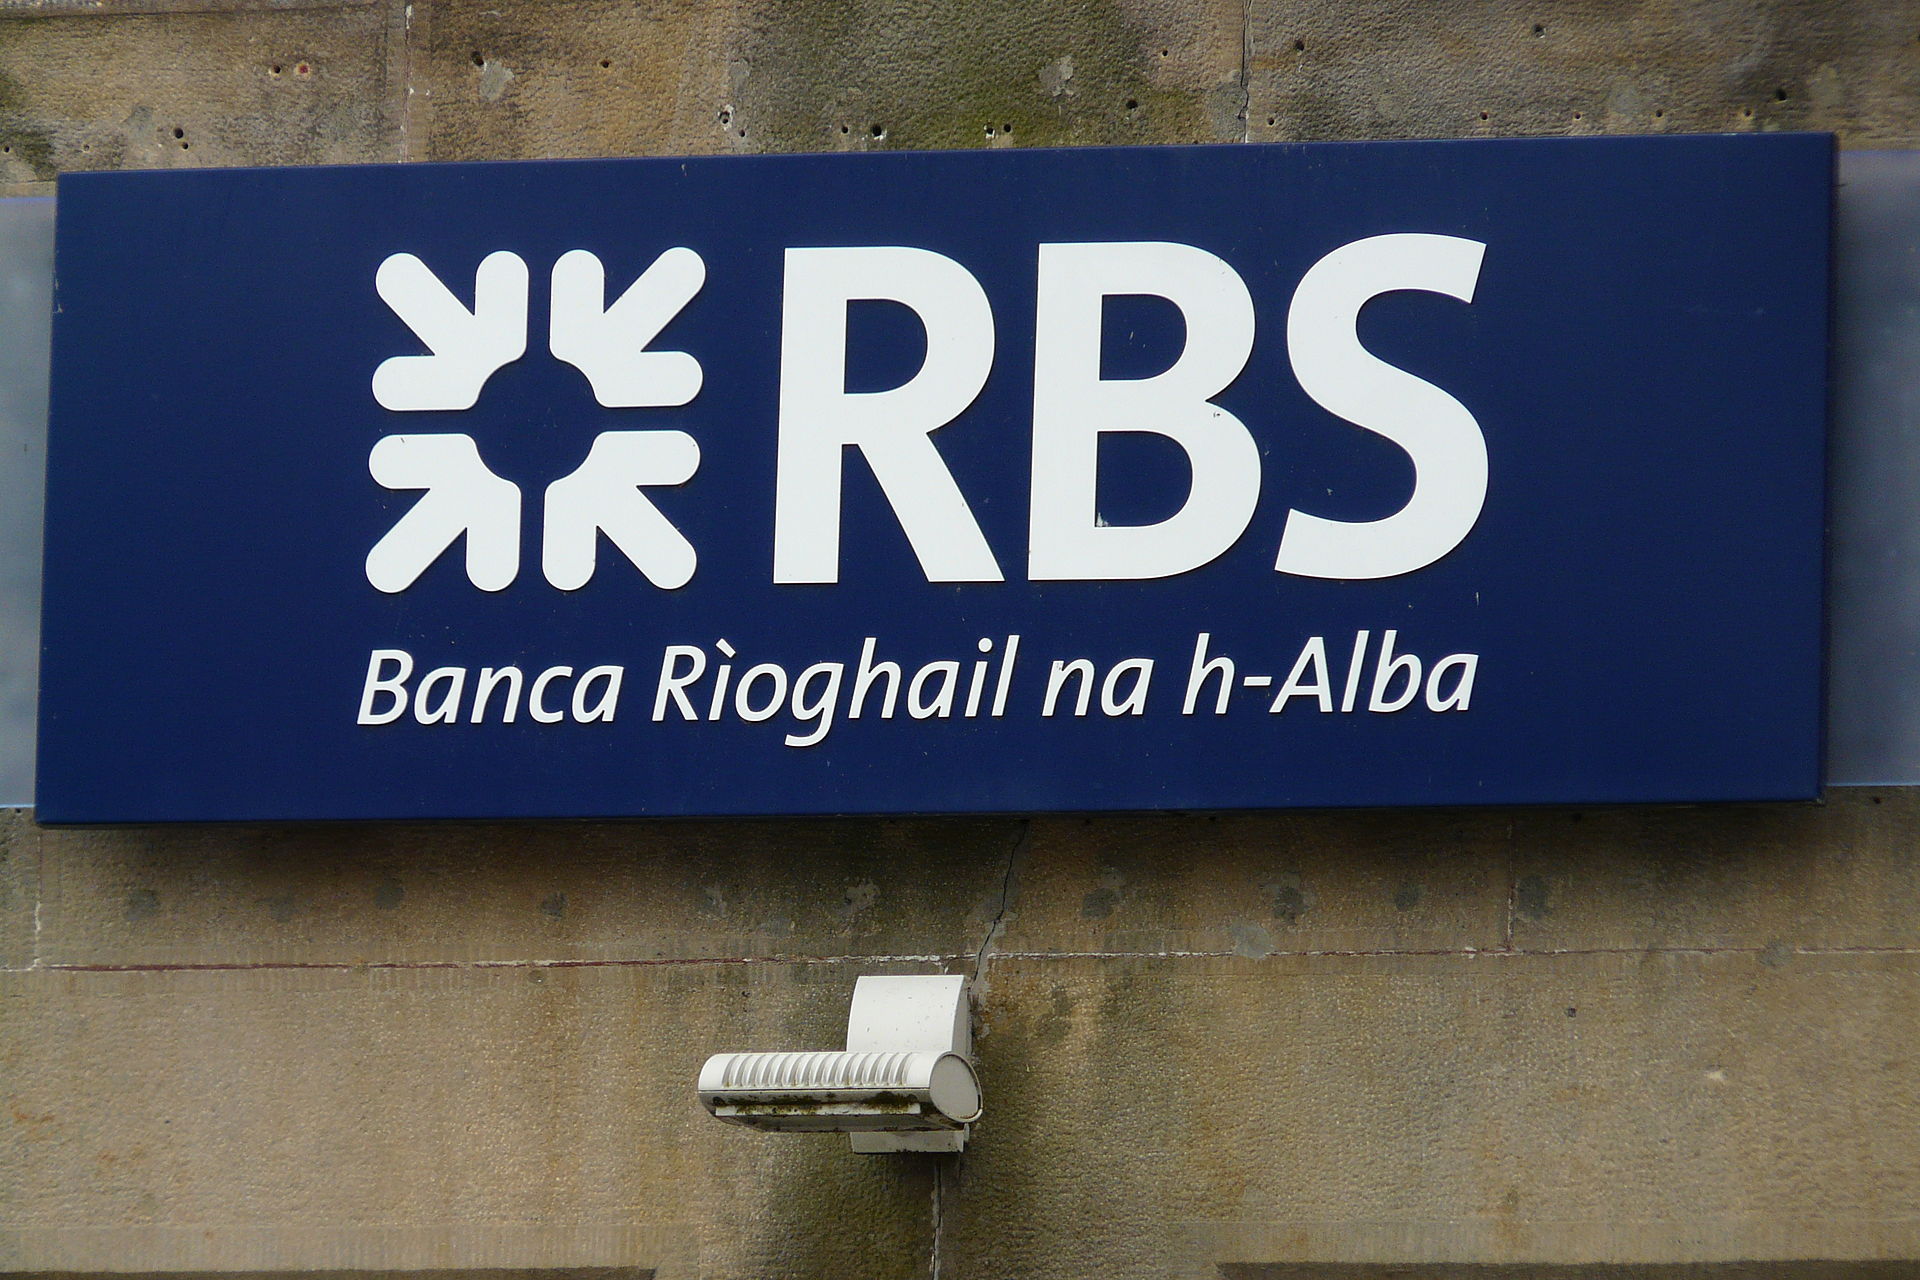 Labour announces plans to nationalise RBS as shareholders back buyback proposal